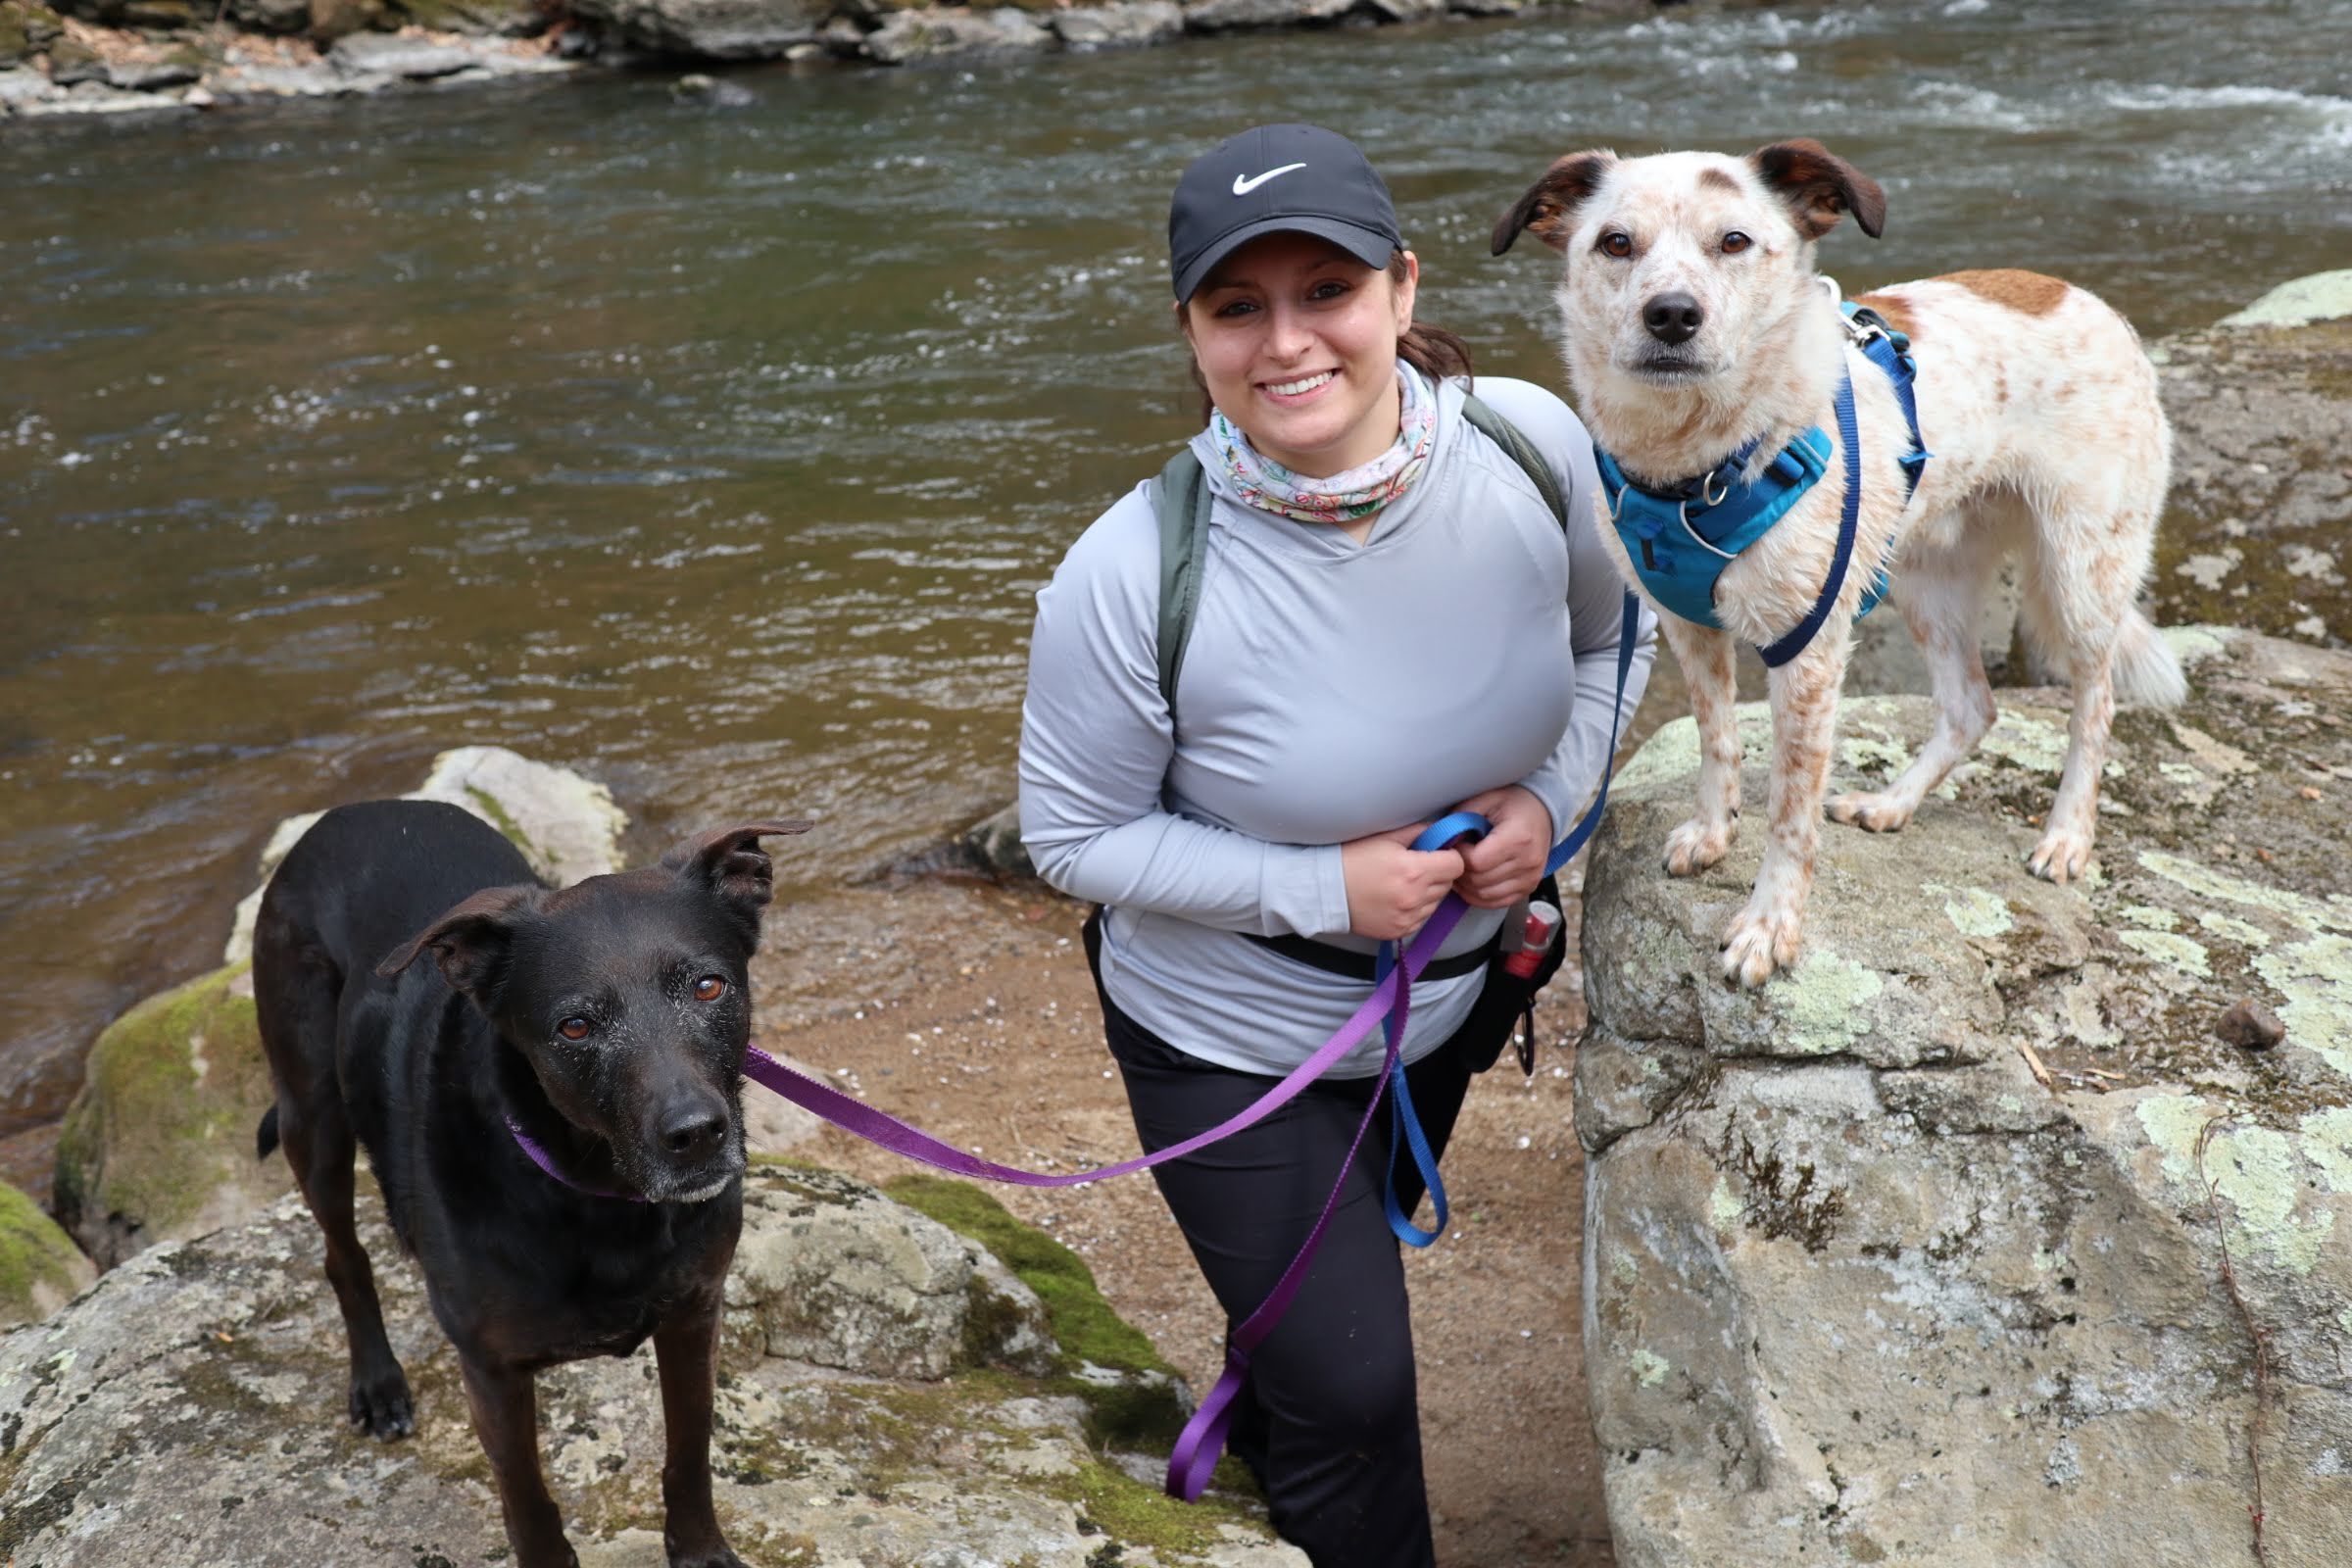 dog commercial Q&A photo - black dog on a rock, woman in the middle, cream colored cattle dog mix on another rock with stream or river behind them